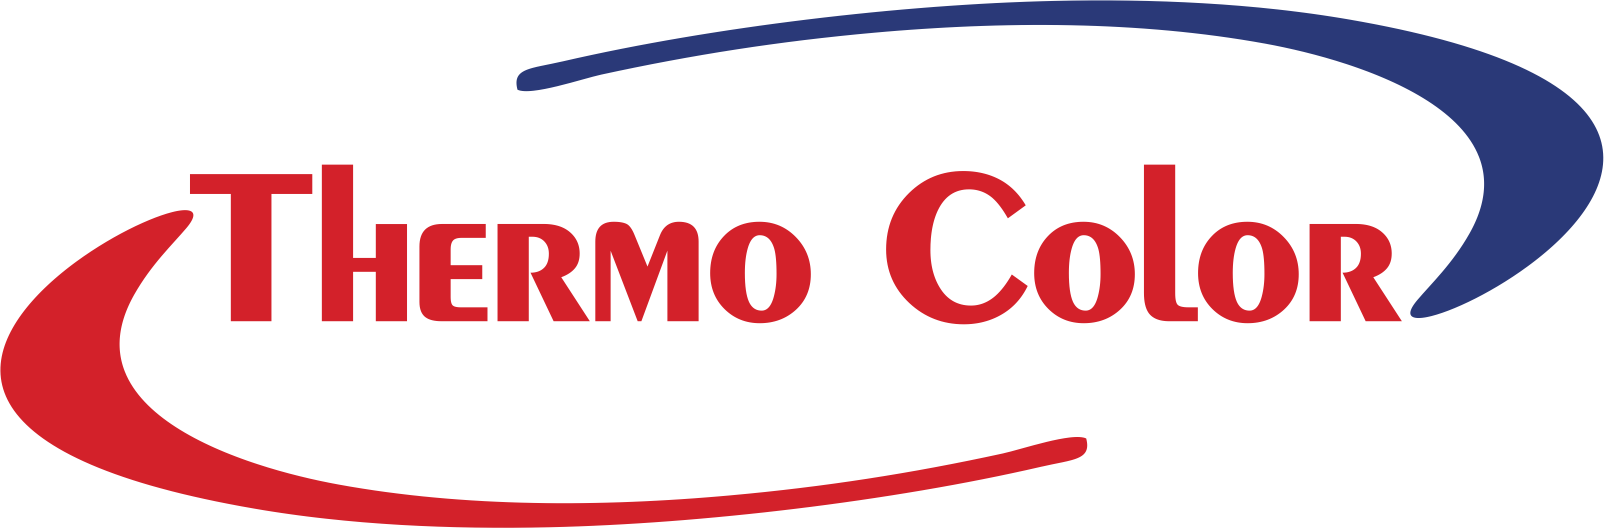 Thermo-Color